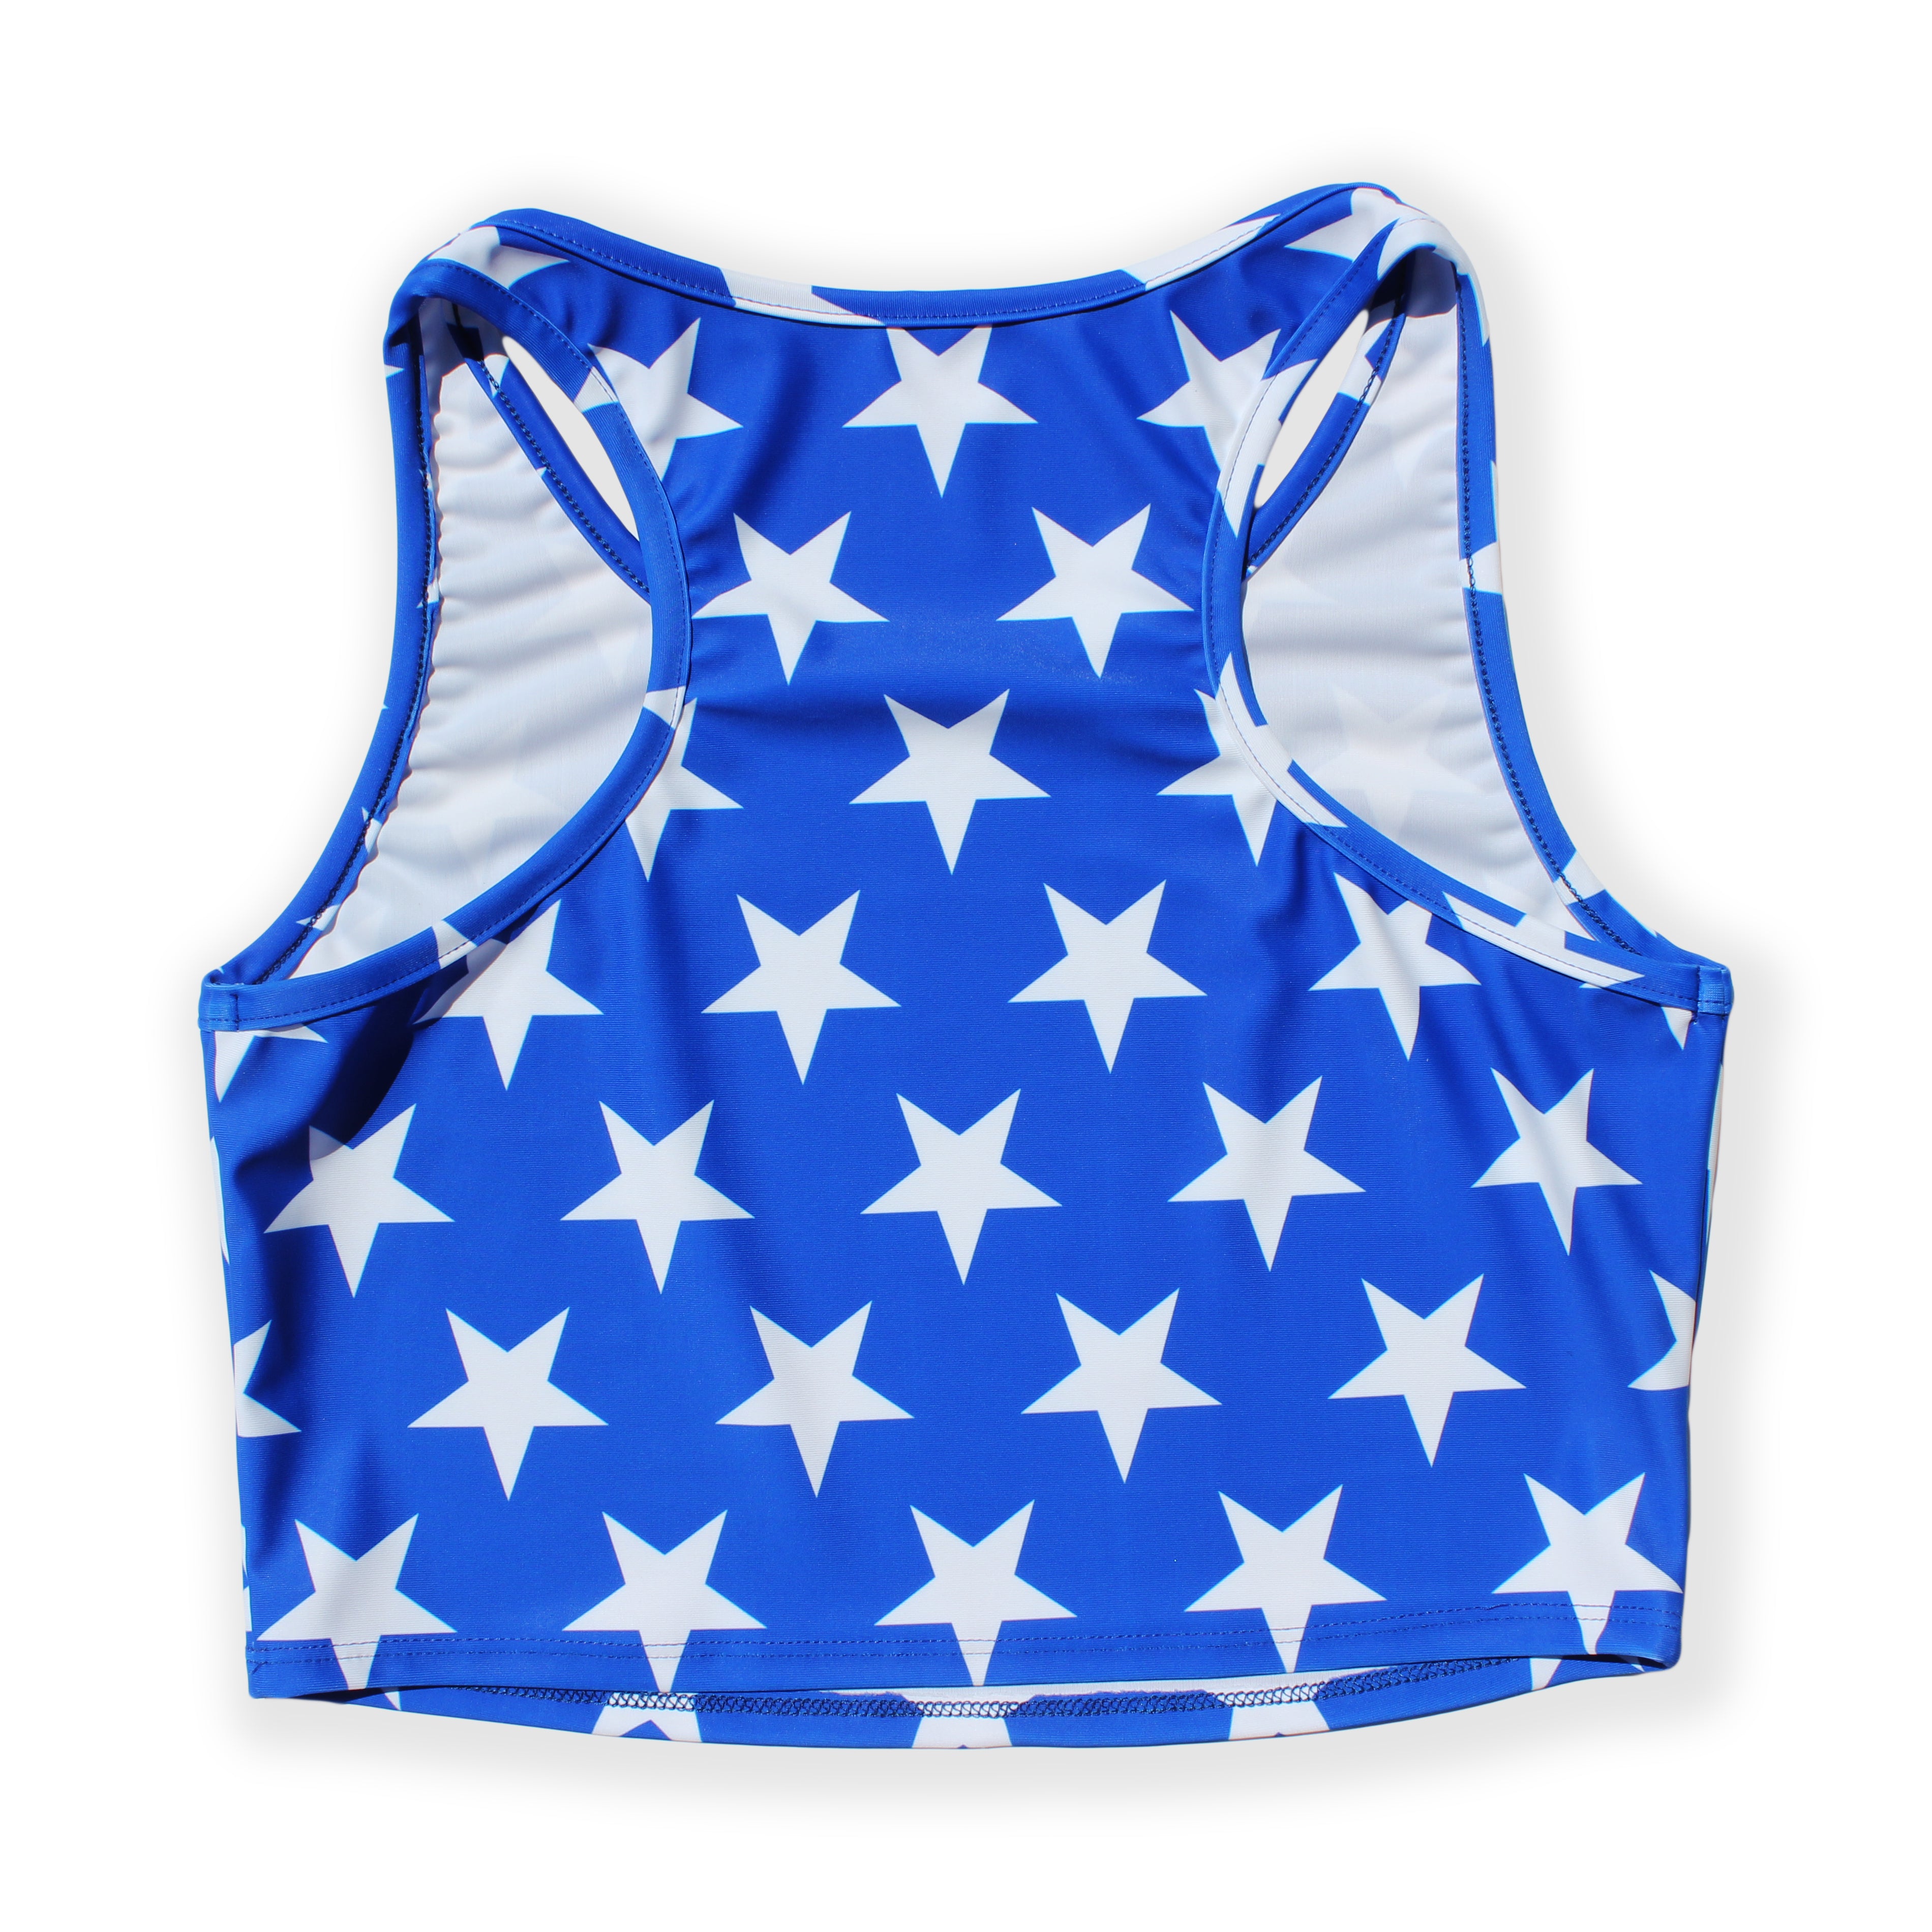 Printed Sleeveless Racerback Crop Top T-Shirt (Blue and White Star Print)